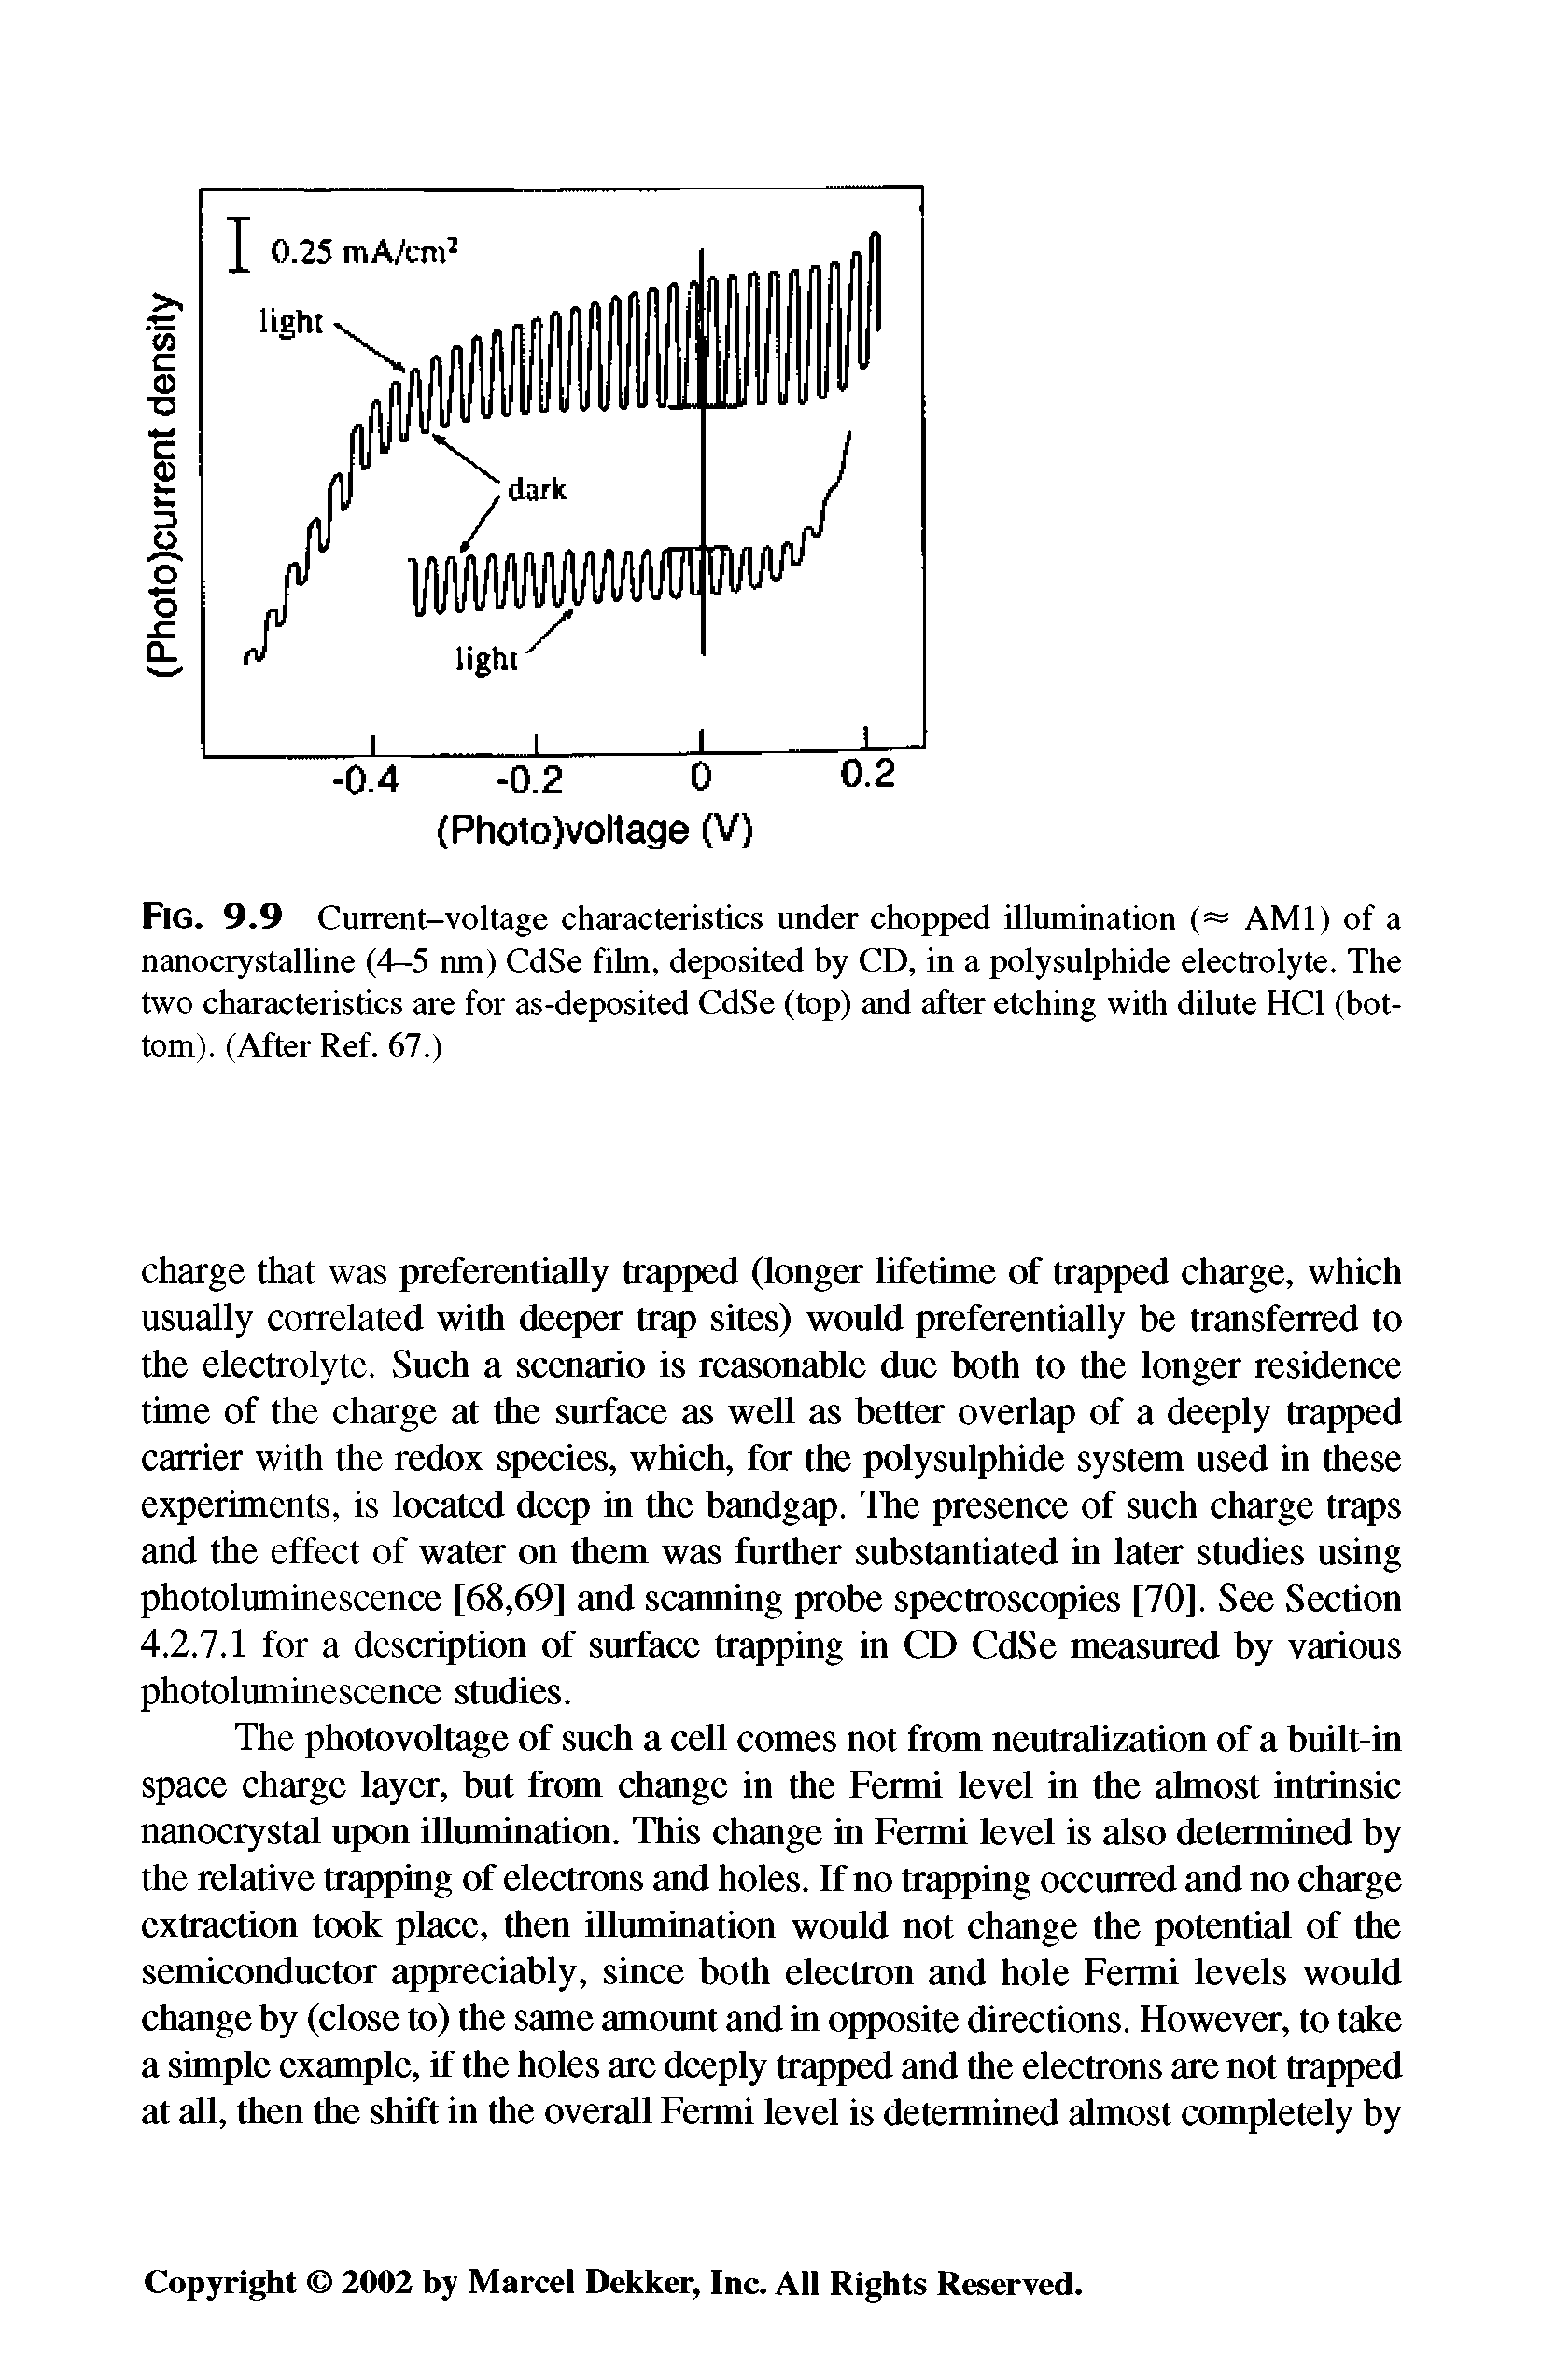 Fig. 9.9 Current-voltage characteristics under chopped illumination (= AMI) of a nanocrystalline (4—5 nm) CdSe film, deposited by CD, in a polysulphide electrolyte. The two characteristics are for as-deposited CdSe (top) and after etching with dilute HCl (bottom). (After Ref. 67.)...